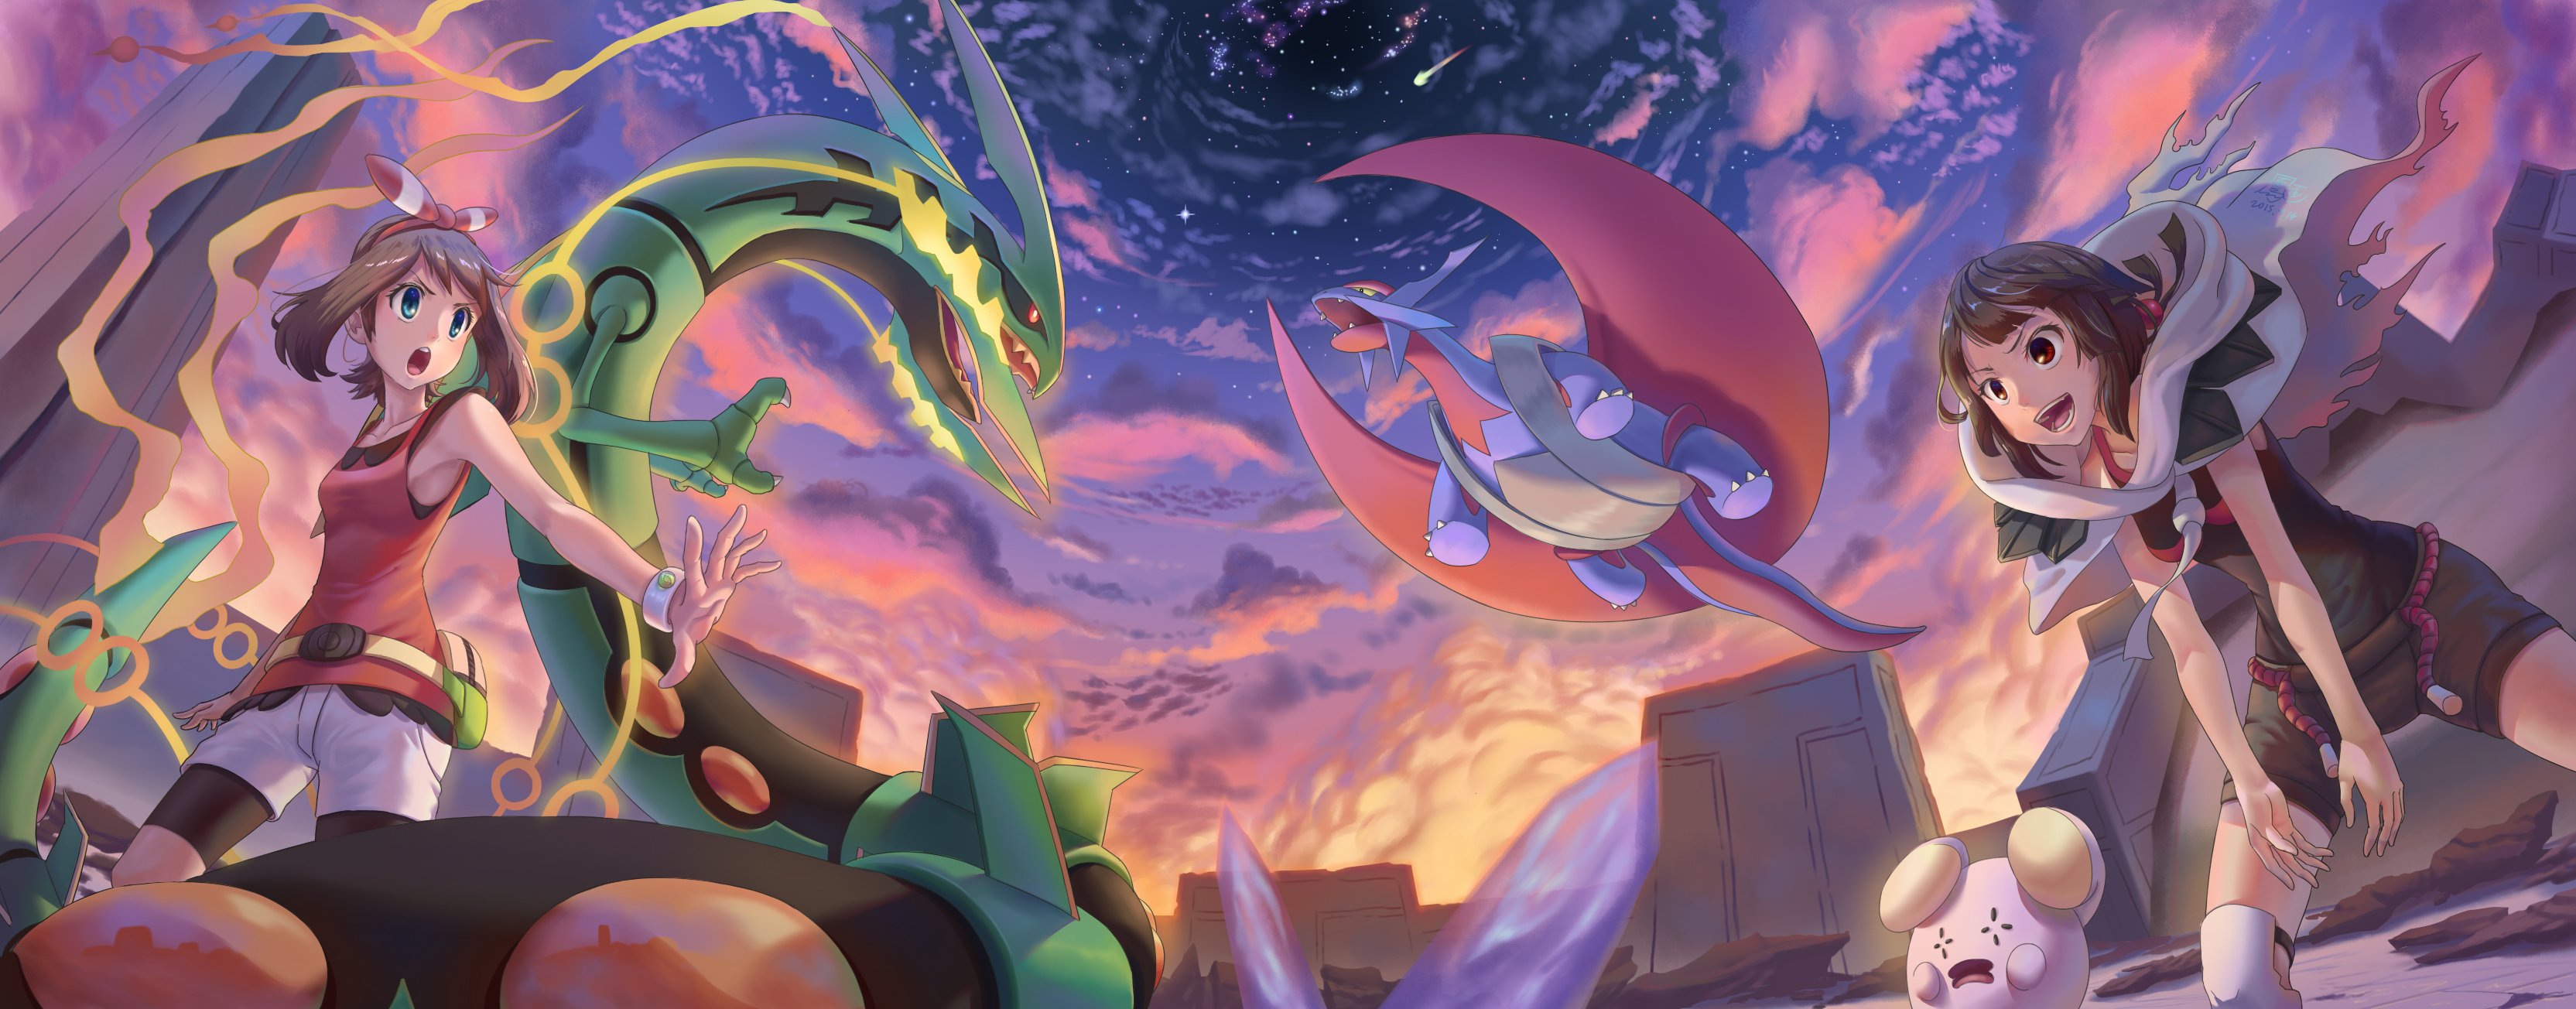 Free download Pokmon Omega Ruby and Alpha Sapphire HD Wallpaper Background [3329x1304] for your Desktop, Mobile & Tablet. Explore Pokémon Ruby Wallpaper. Pokémon Ruby Wallpaper, Pokemon Omega Ruby Wallpaper